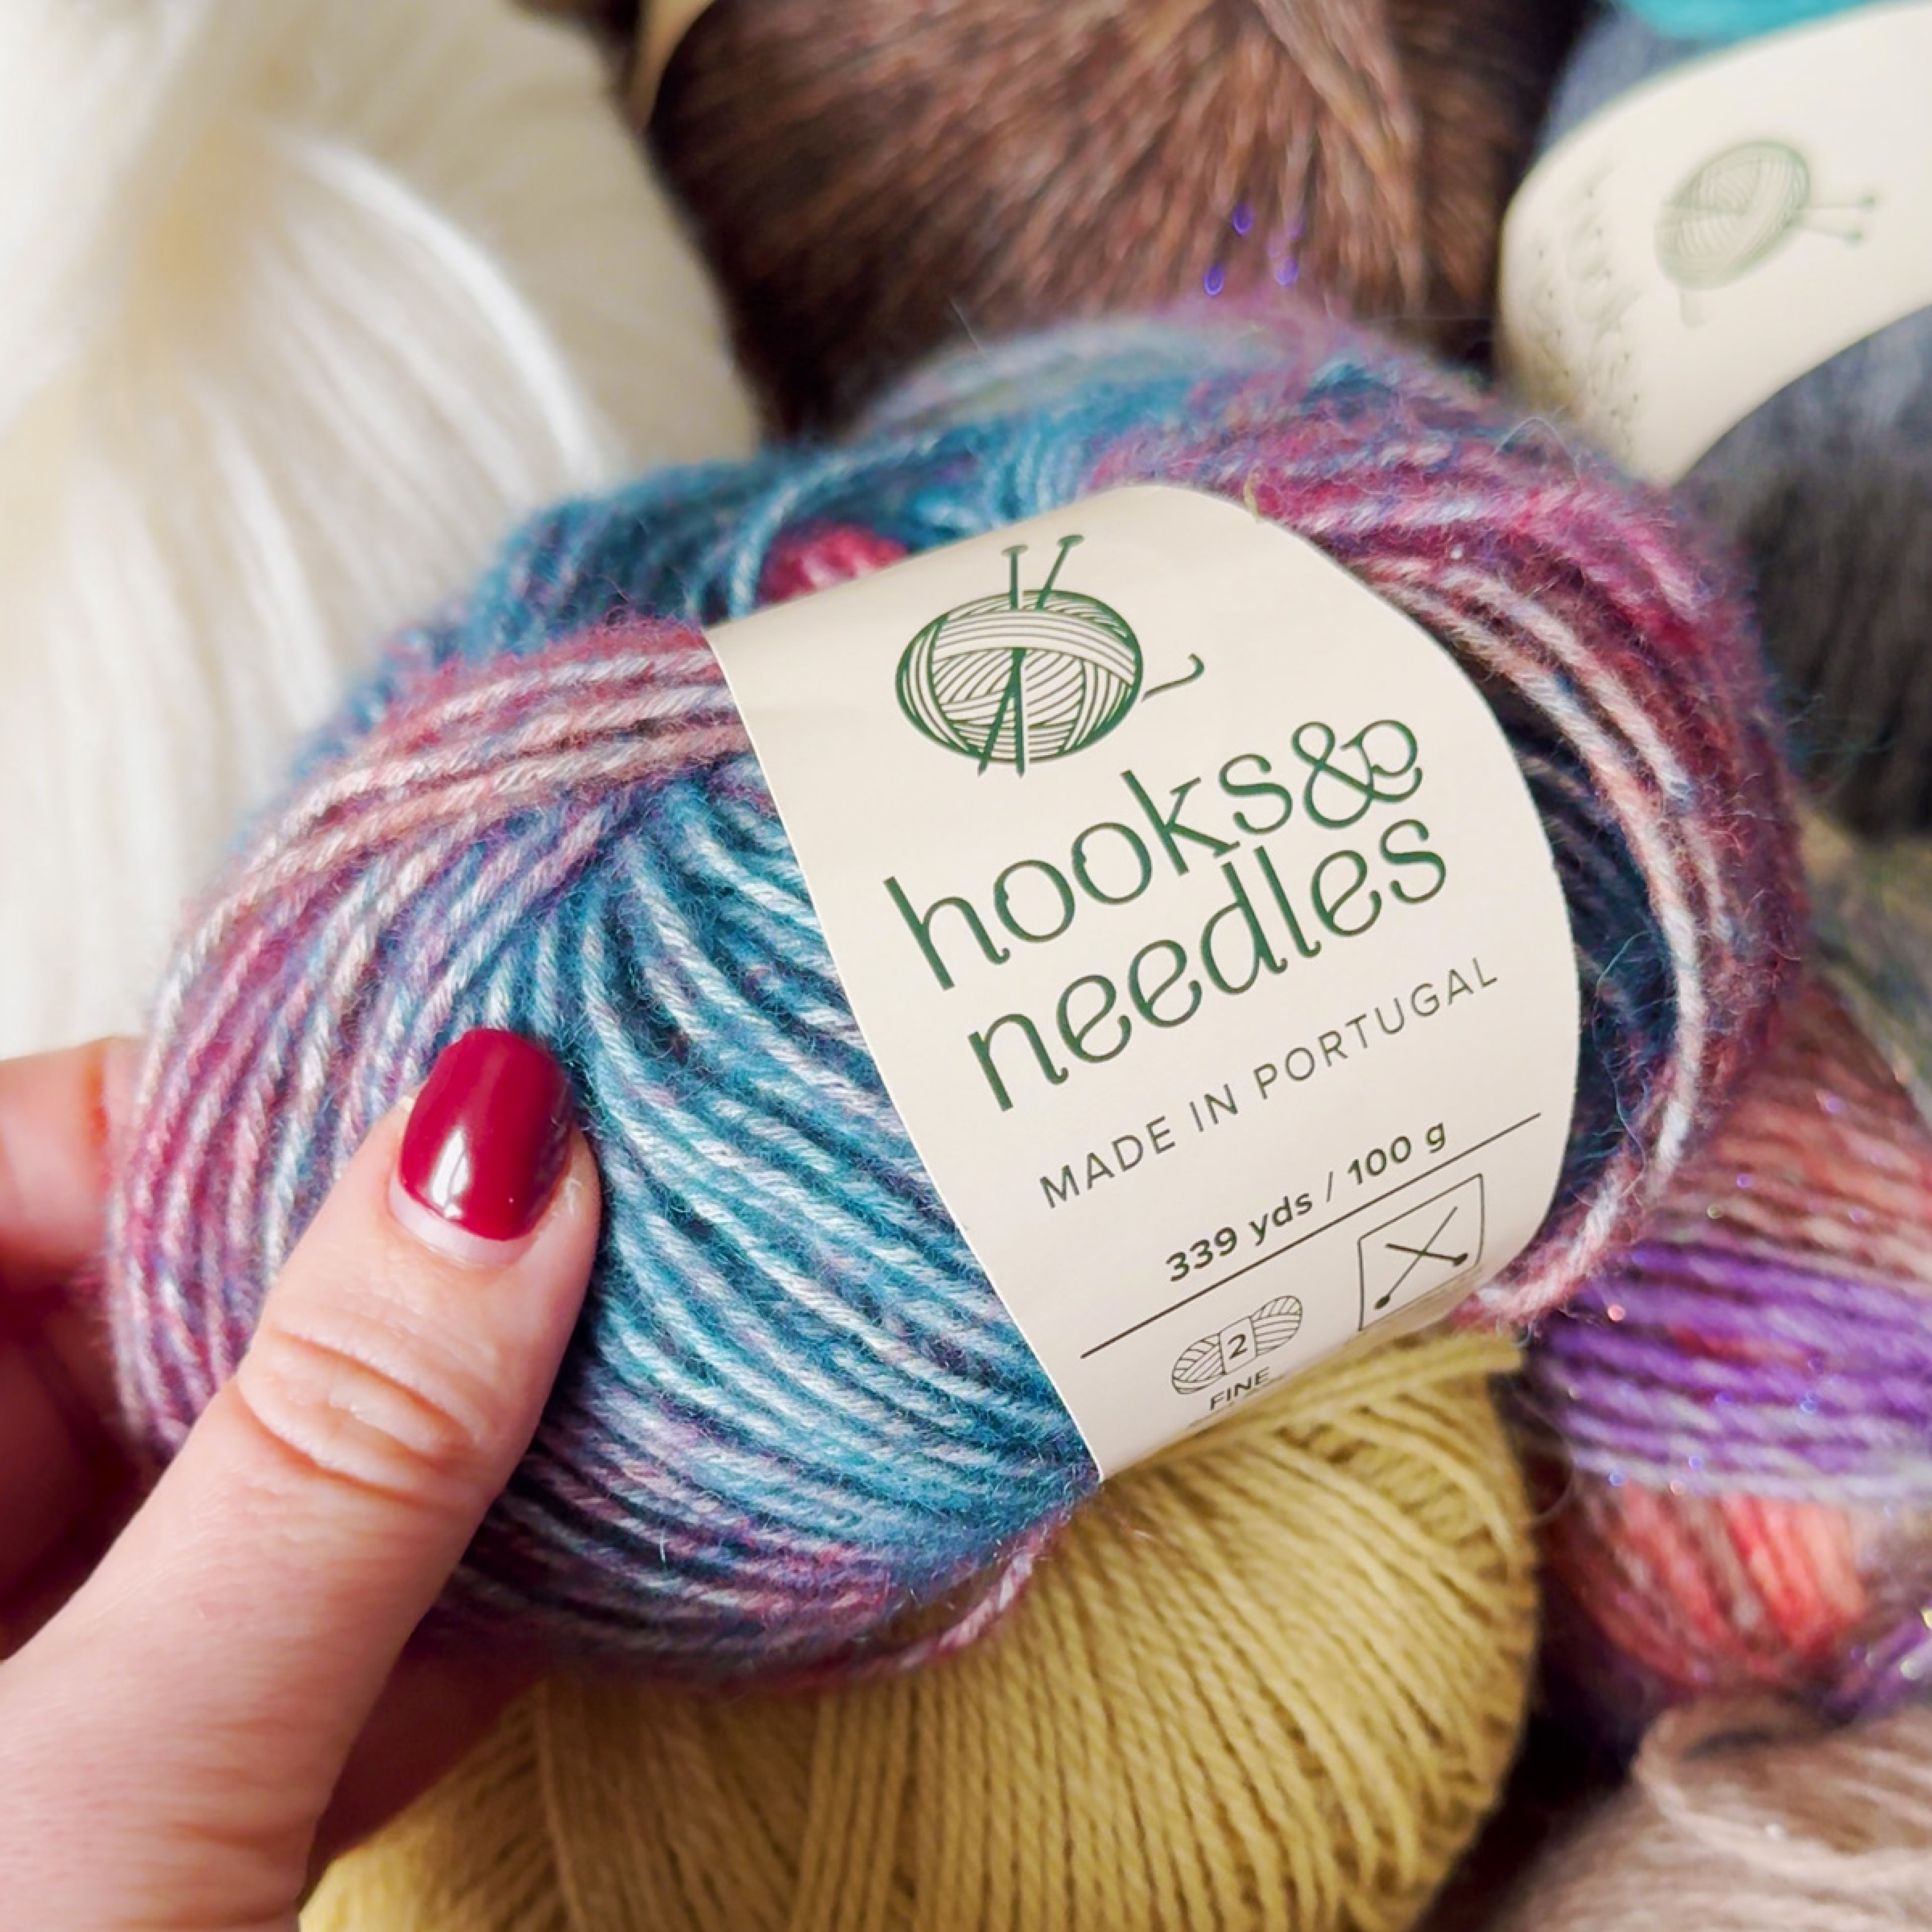 A hand holding a skein of multicolored yarn with a "12-Month-Prepaid Hooks & Needles Subscription Box #25" label indicating it is made in Portugal.